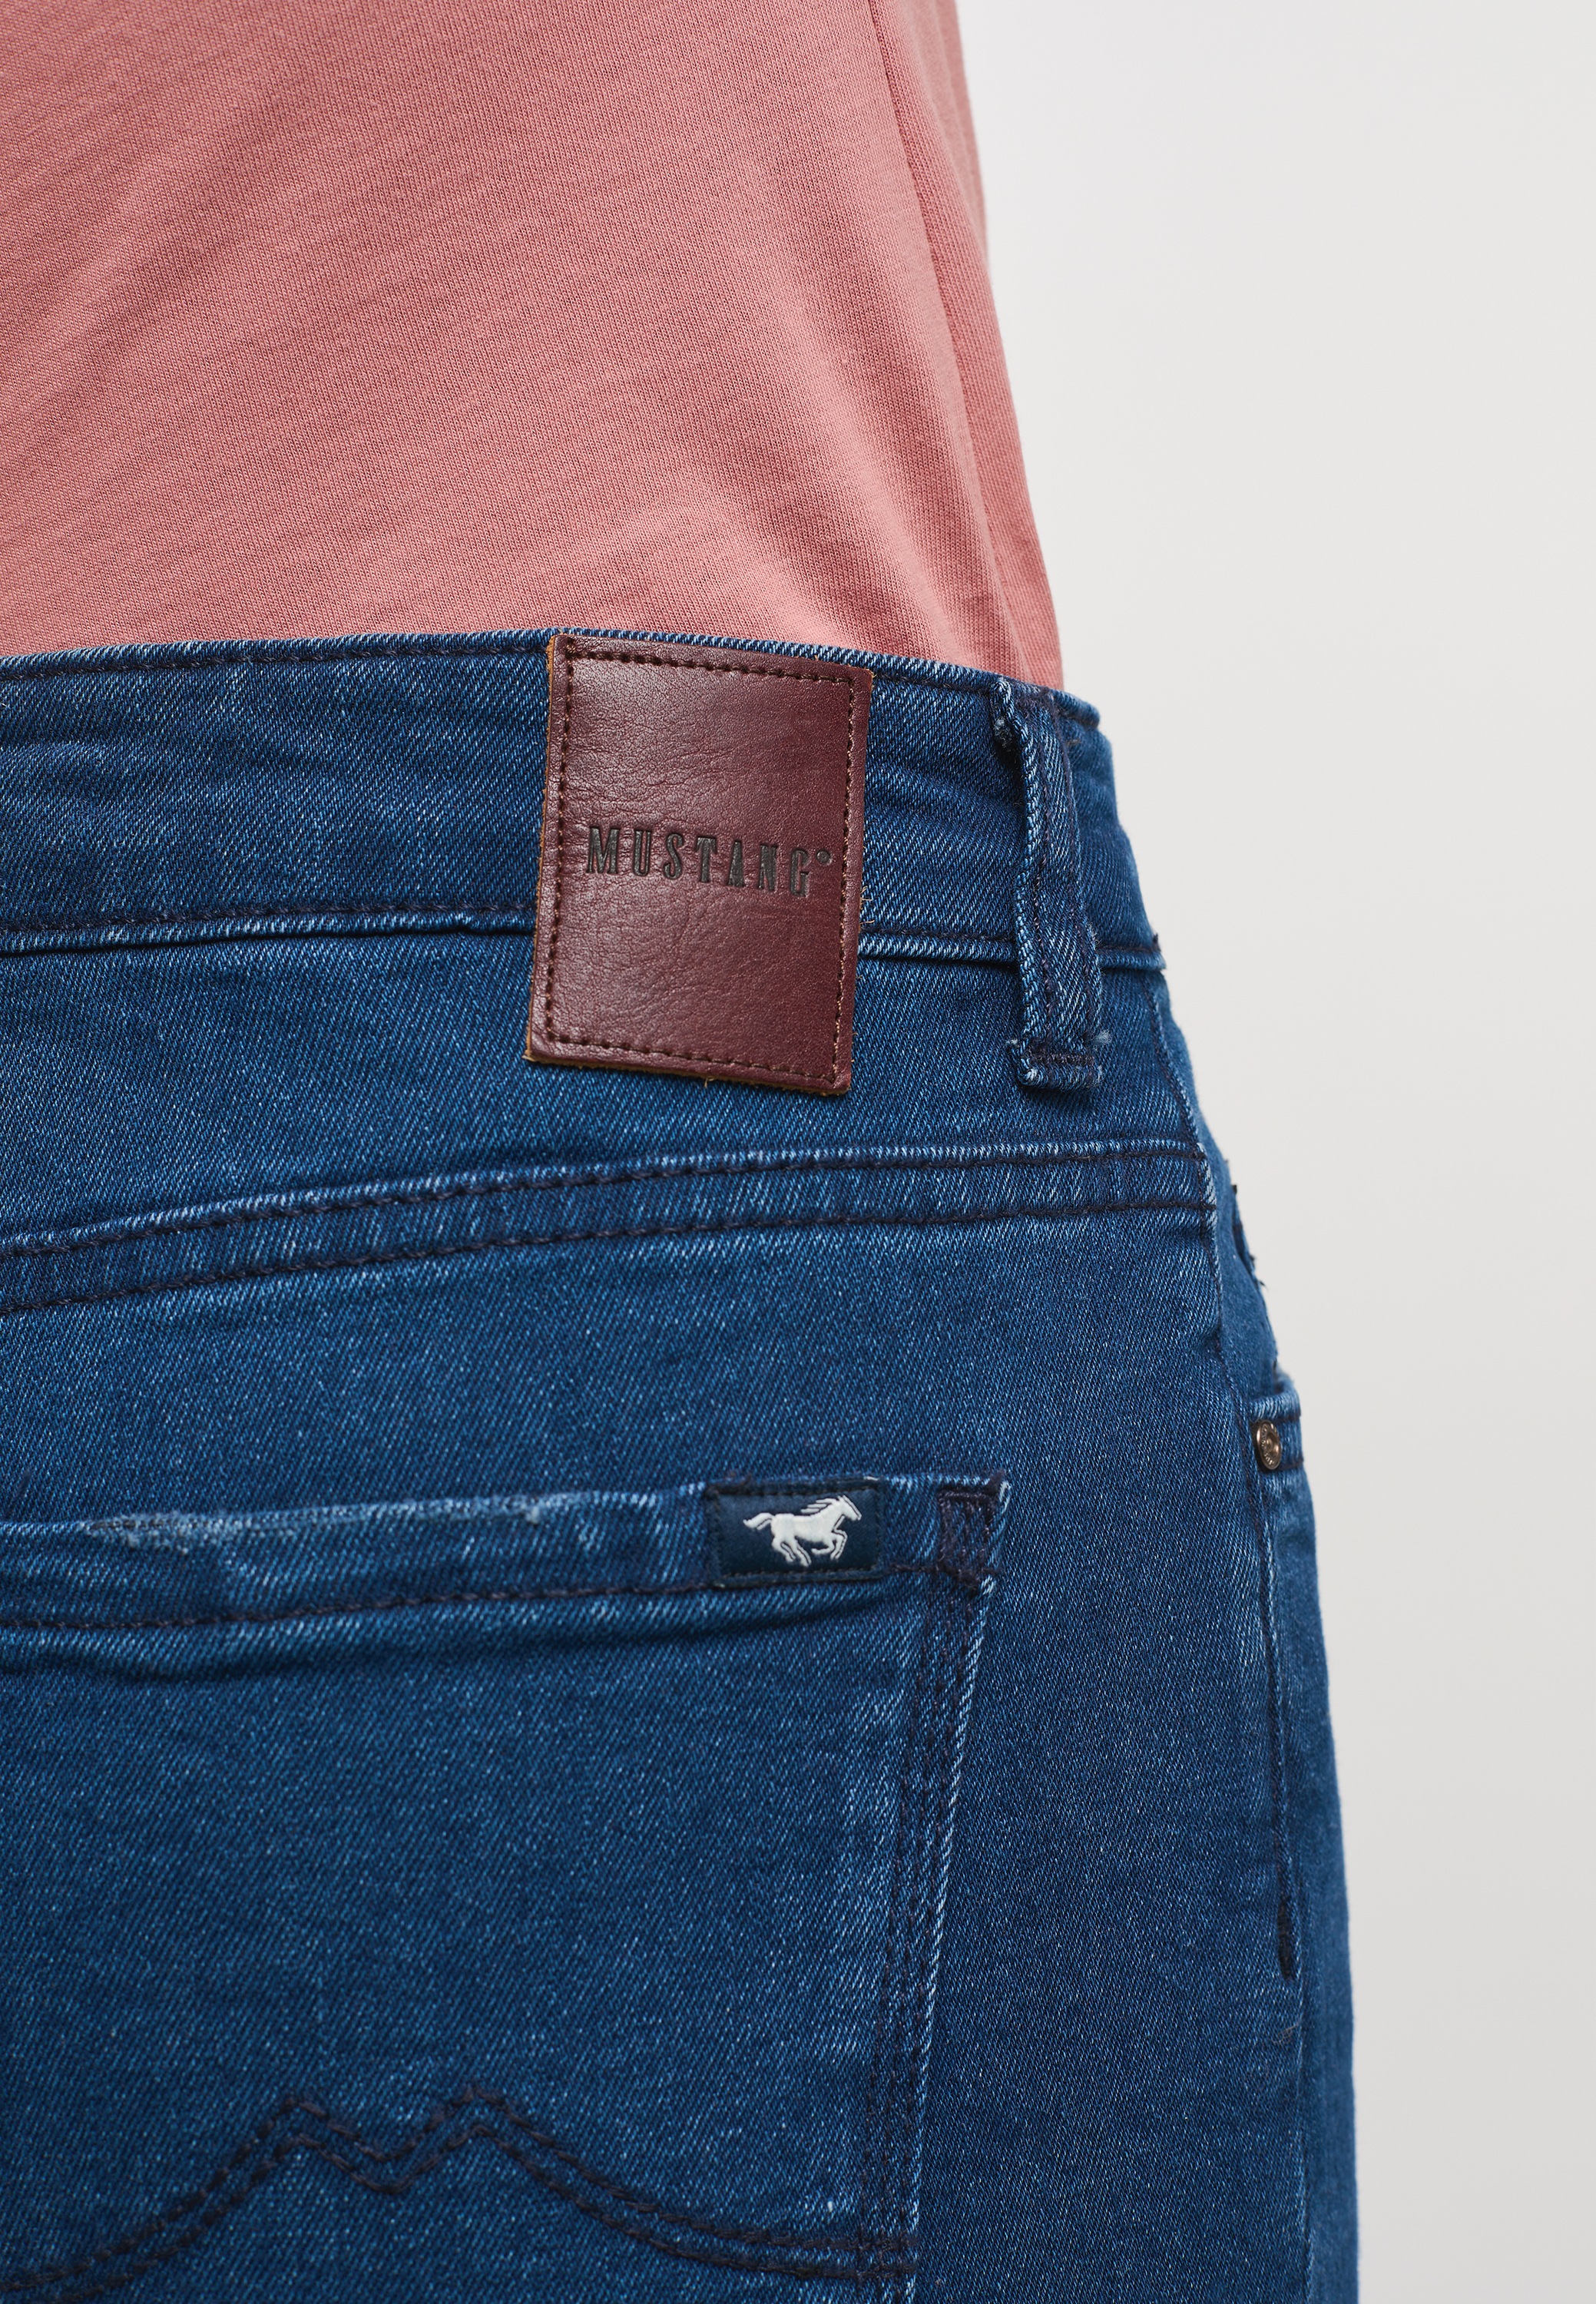 »Mustang Mustang Crosby Style Crosby Slim«, Hose bestellen MUSTANG Style Relaxed Slim 5-Pocket-Jeans Relaxed